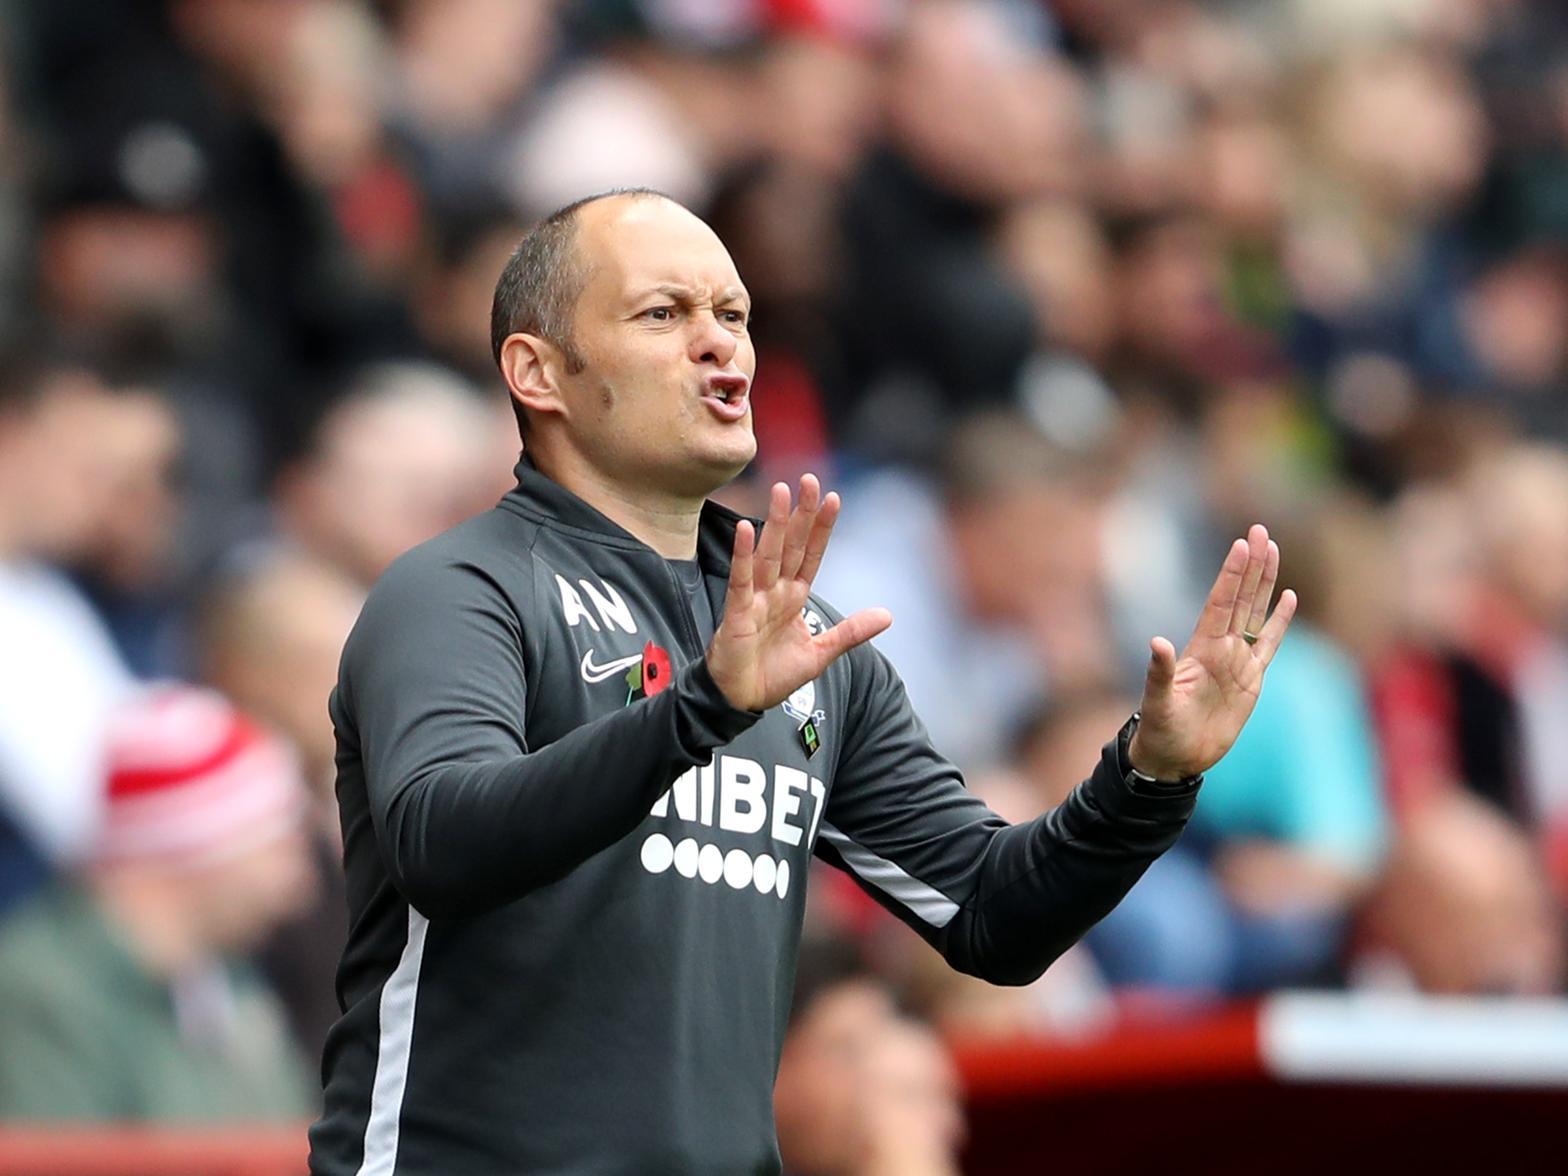 Despite Stoke City and Preston being at polar opposites of the table, the latter's coach Alex Neil is still the bookies' favourite to become the former's manager, with Tony Pulis also a contender. (Sky Bet)